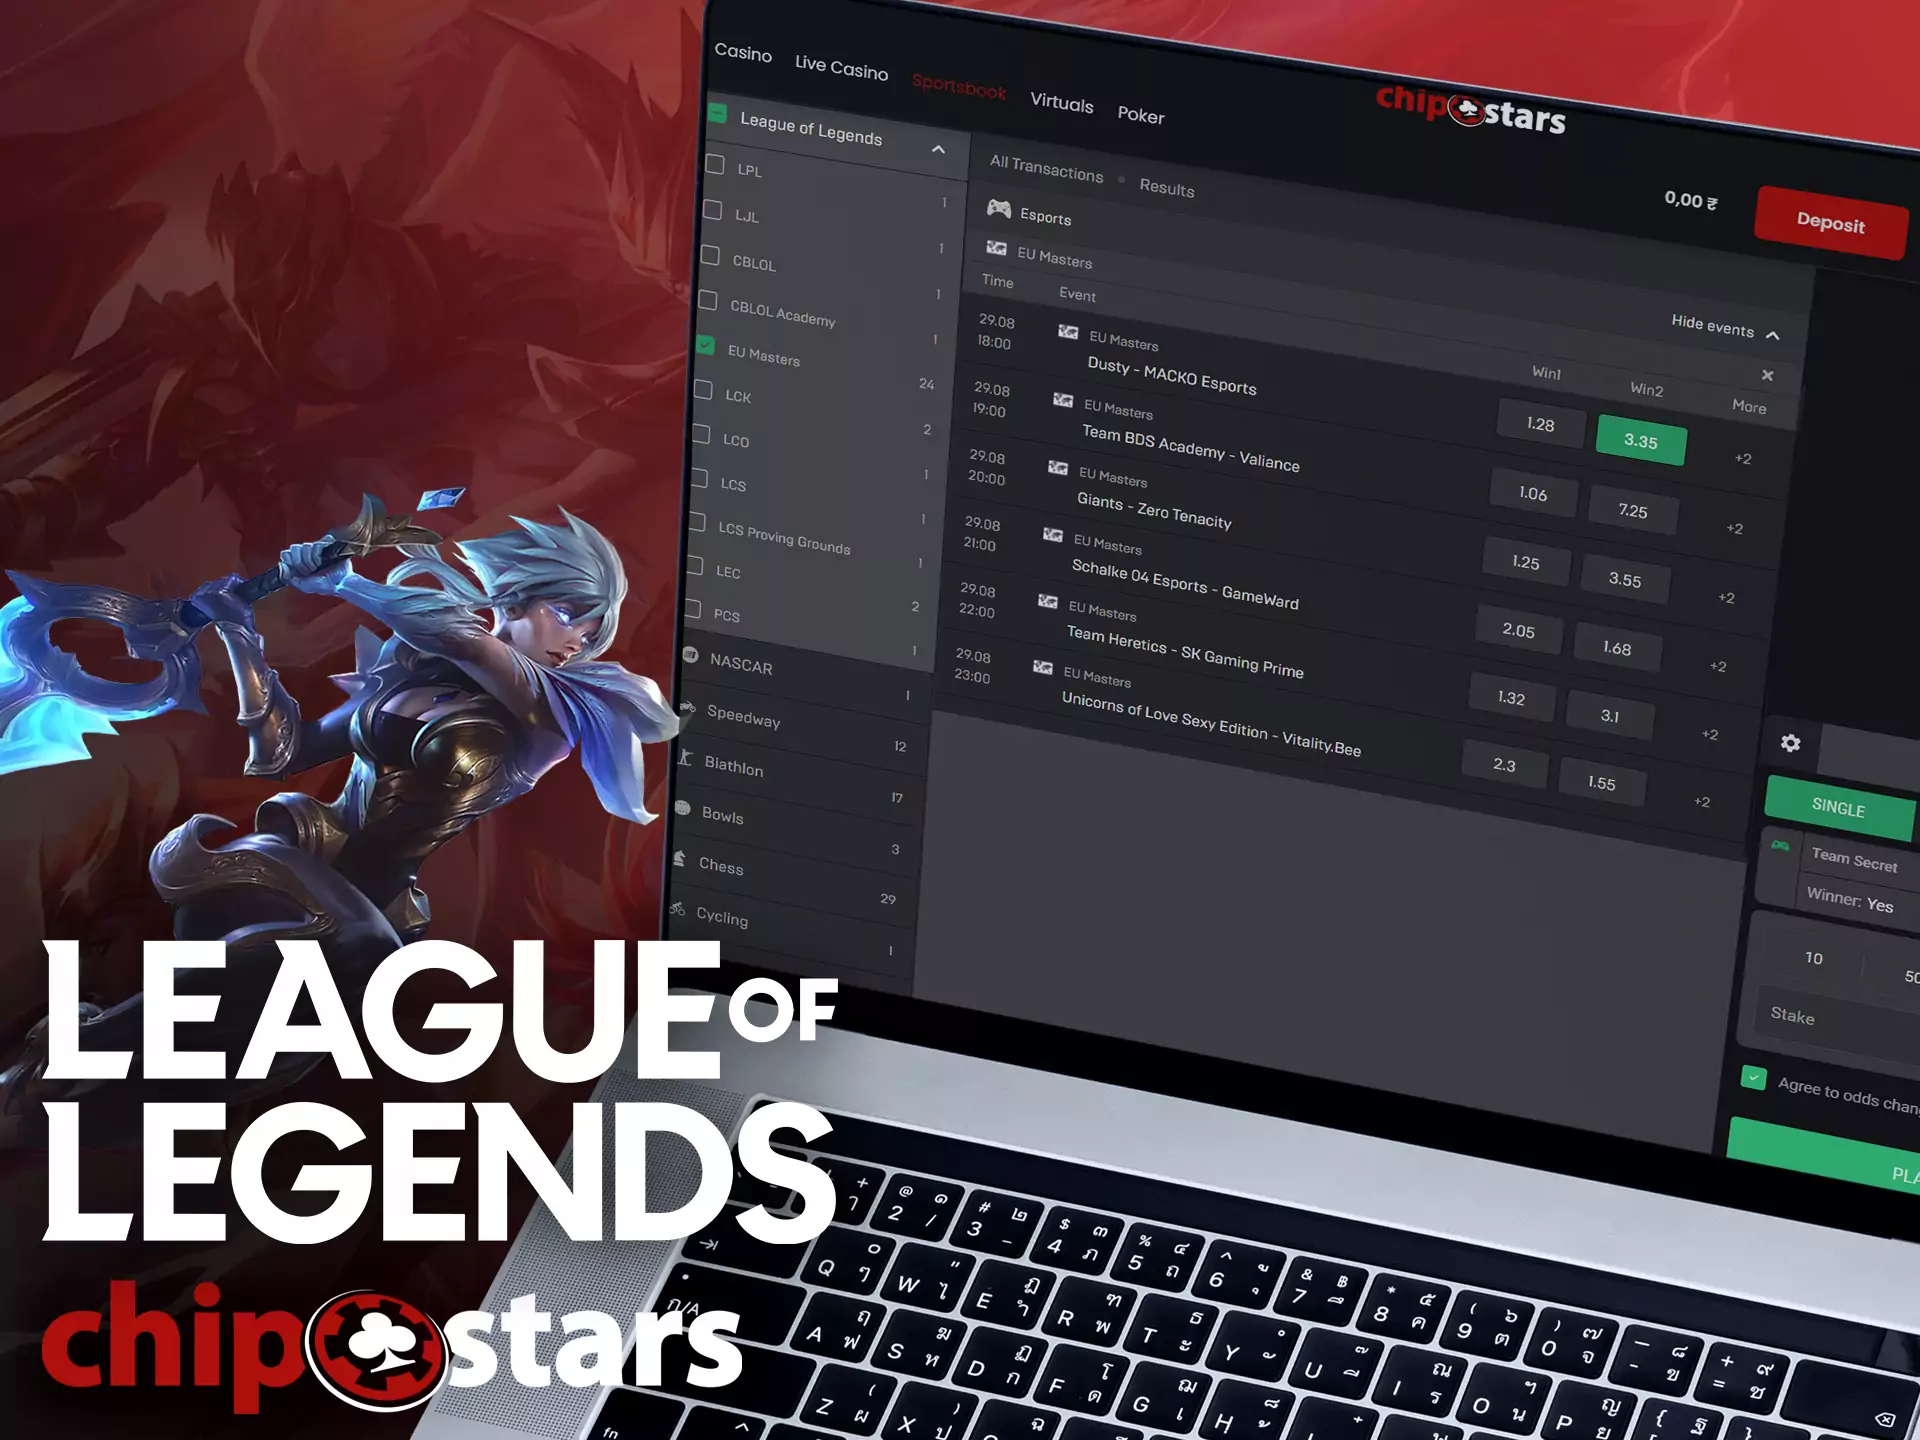 On the Chipstars site, you can place bets on League of Legends matches online.